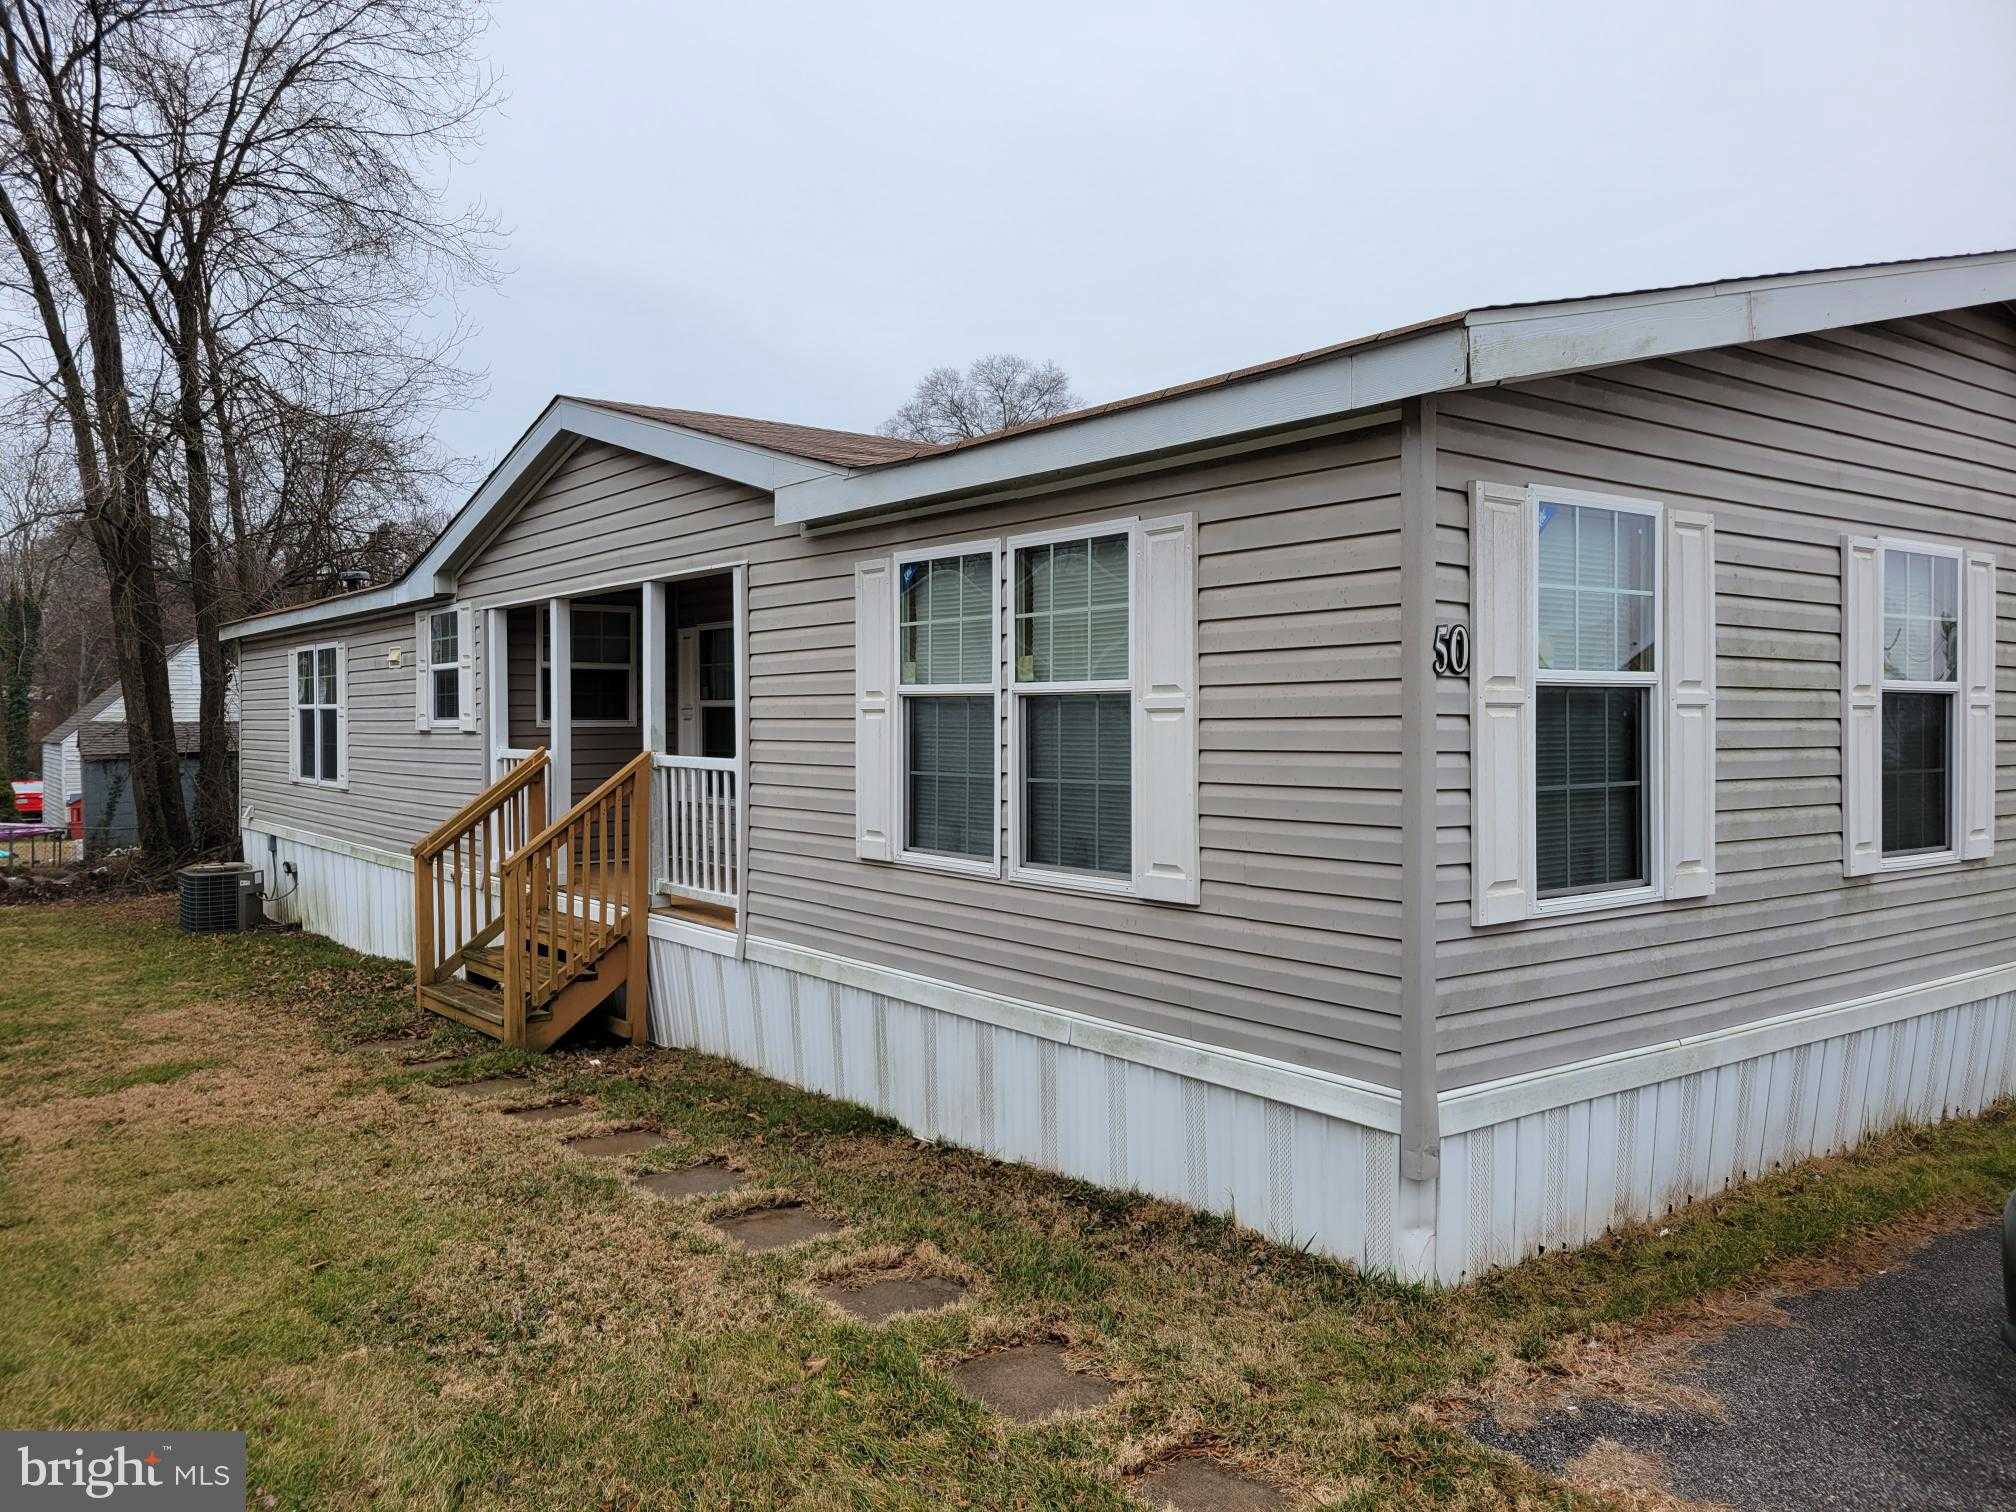 Photo 1 of 1 of 490 N PATUXENT RD. Unit 50 mobile home